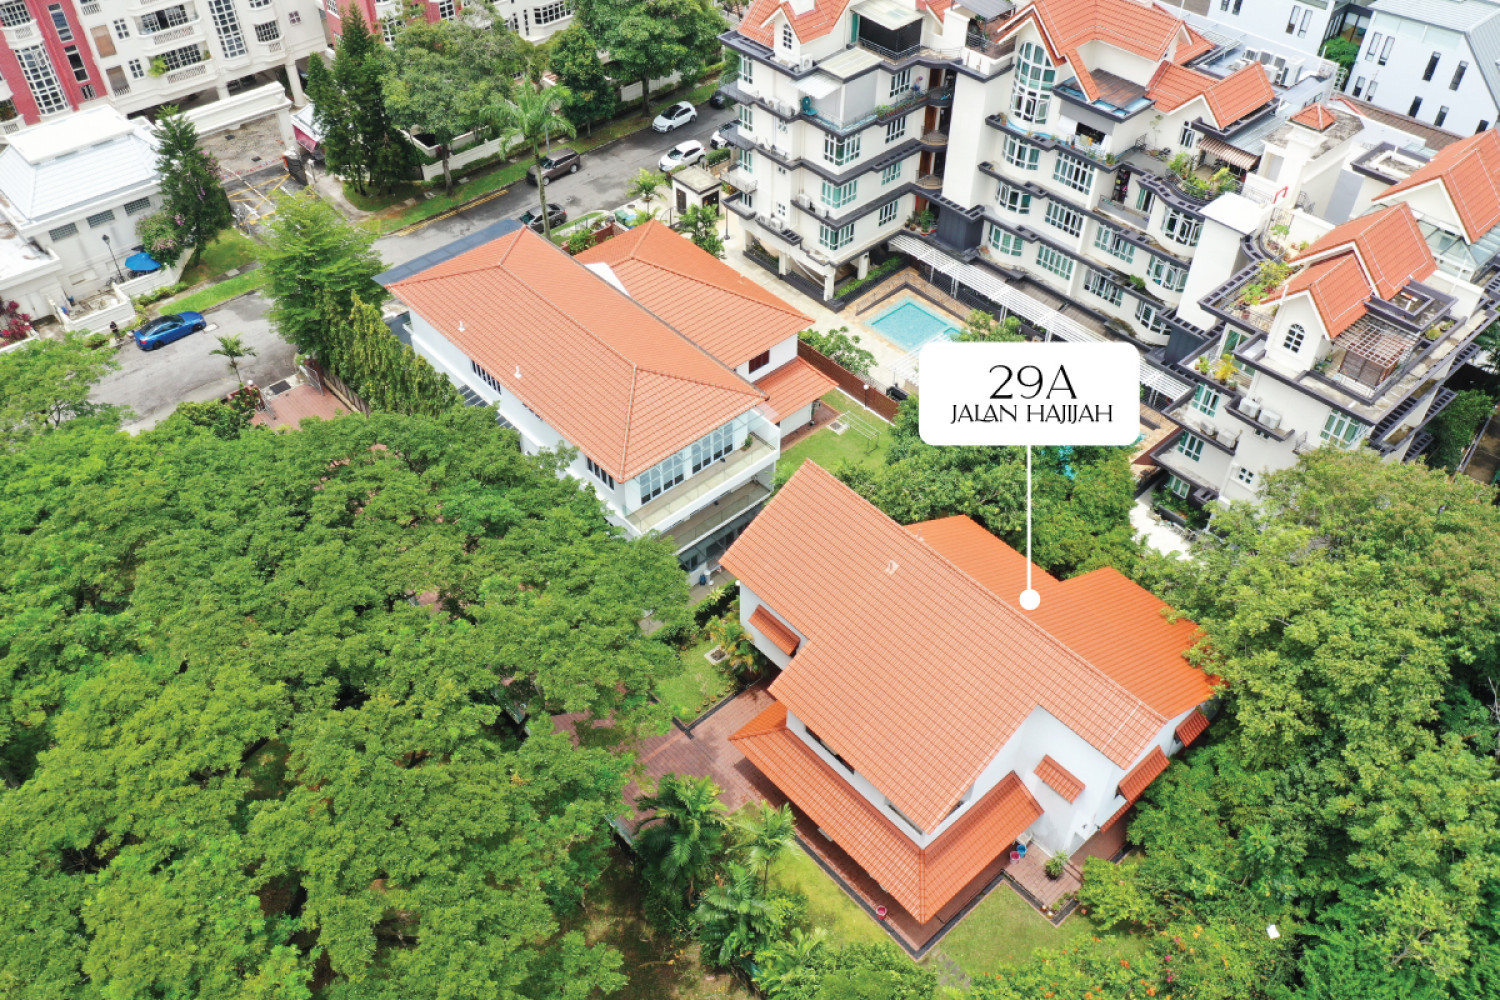 Freehold residential site at Jalan Hajijah for sale at $15.25 mil - Property News